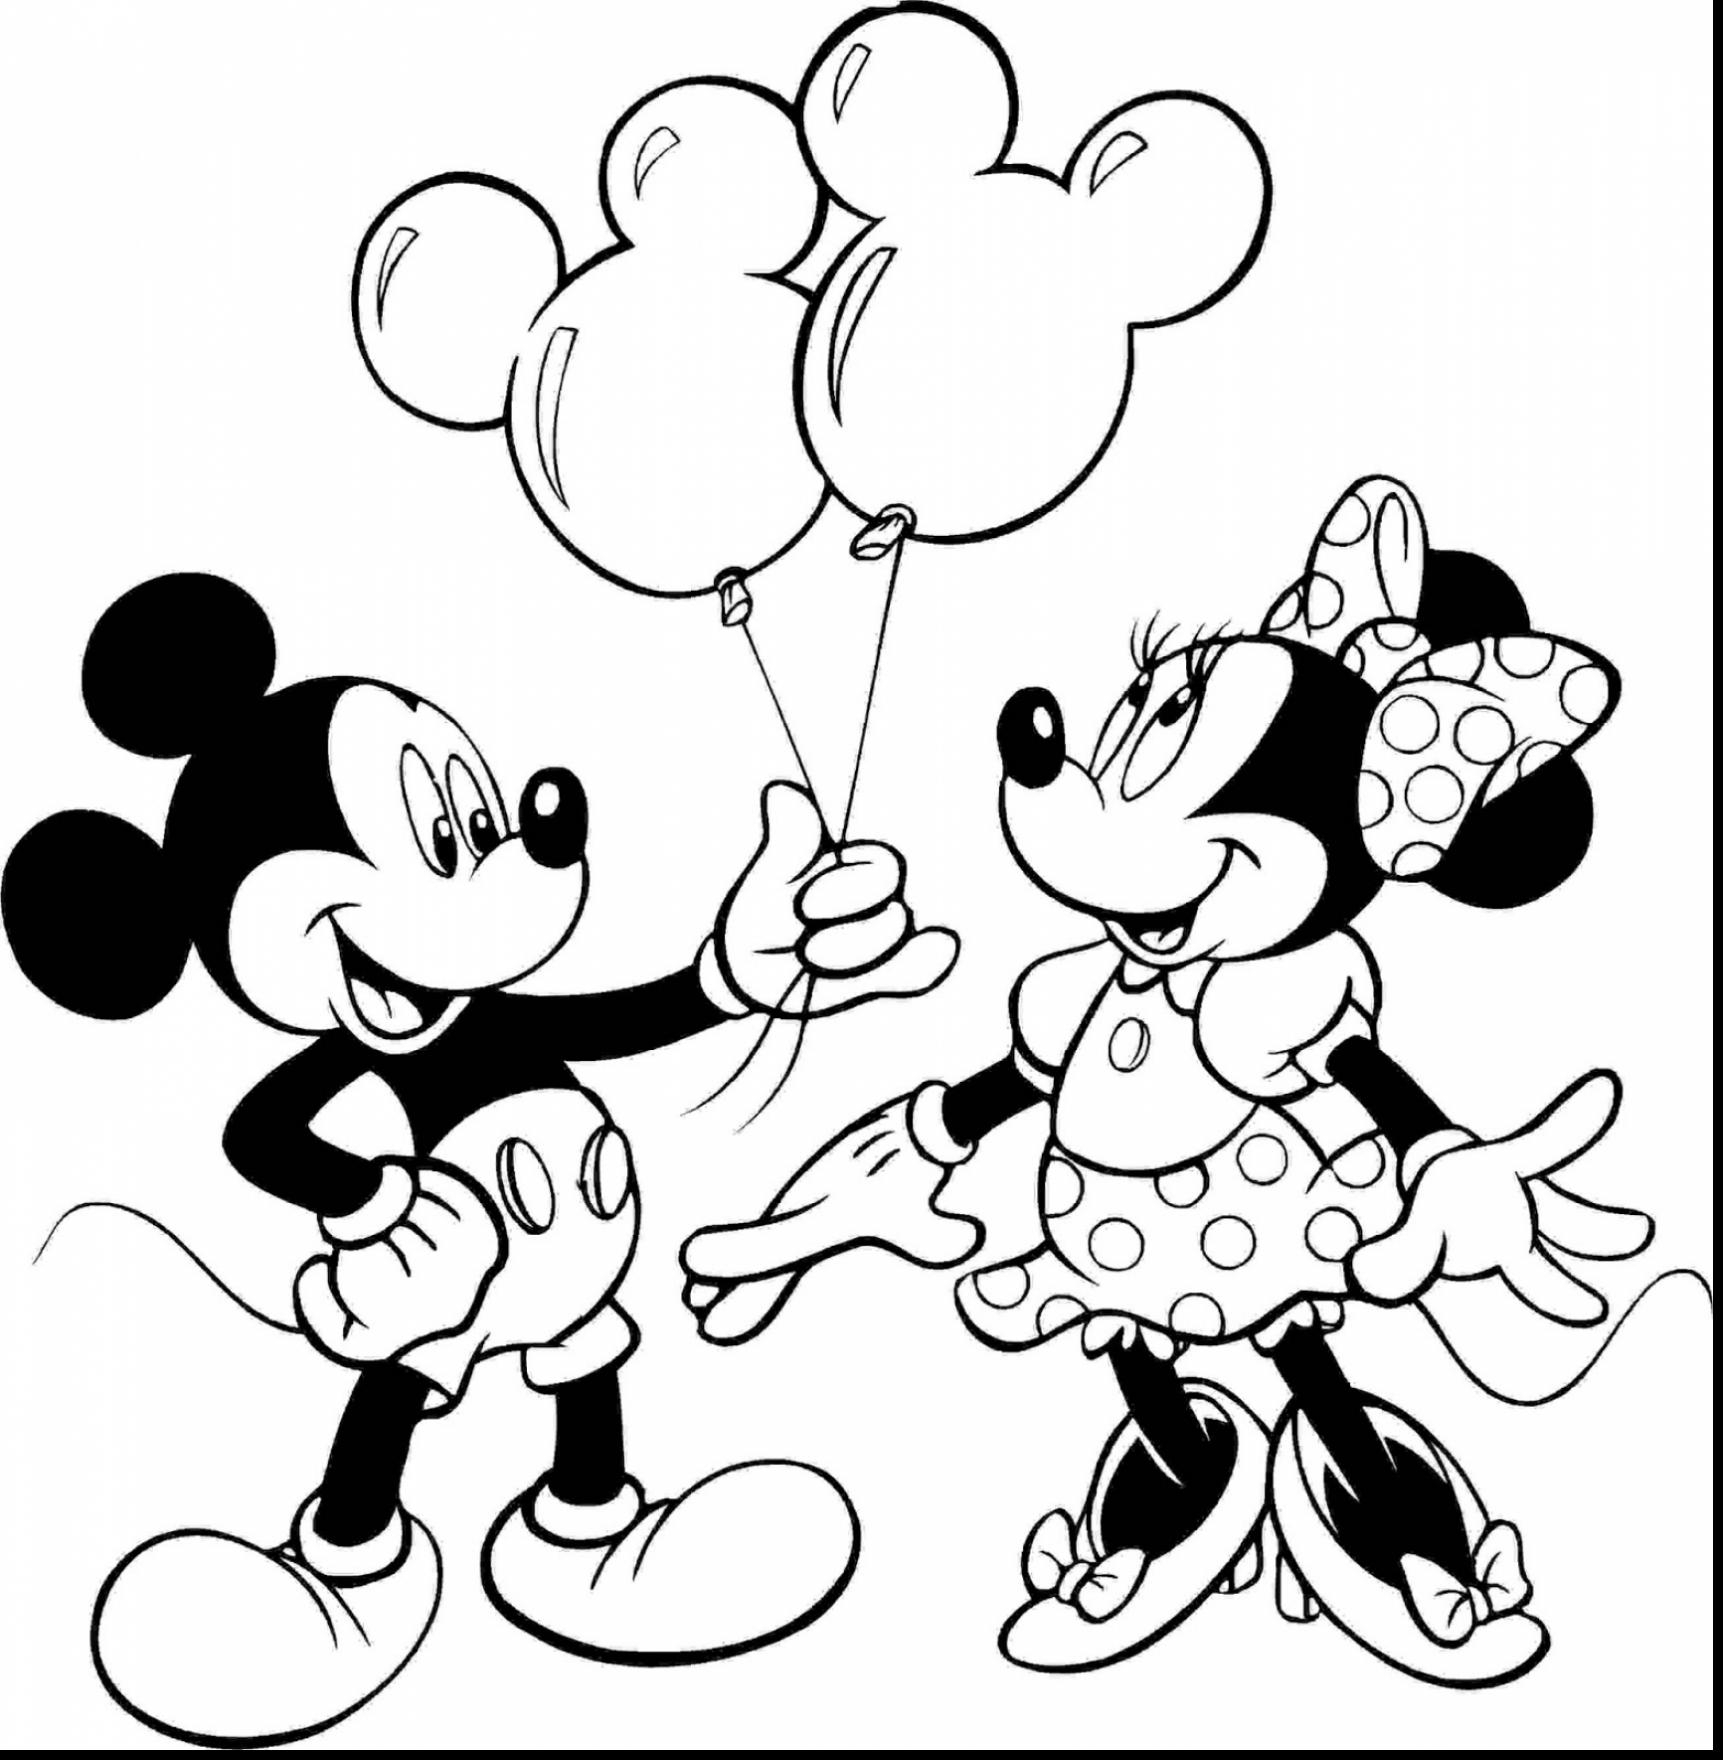 Free Baby Minnie Mouse Coloring Pages Ba Mickey And Minnie Mouse Coloring Pages At Getdrawings